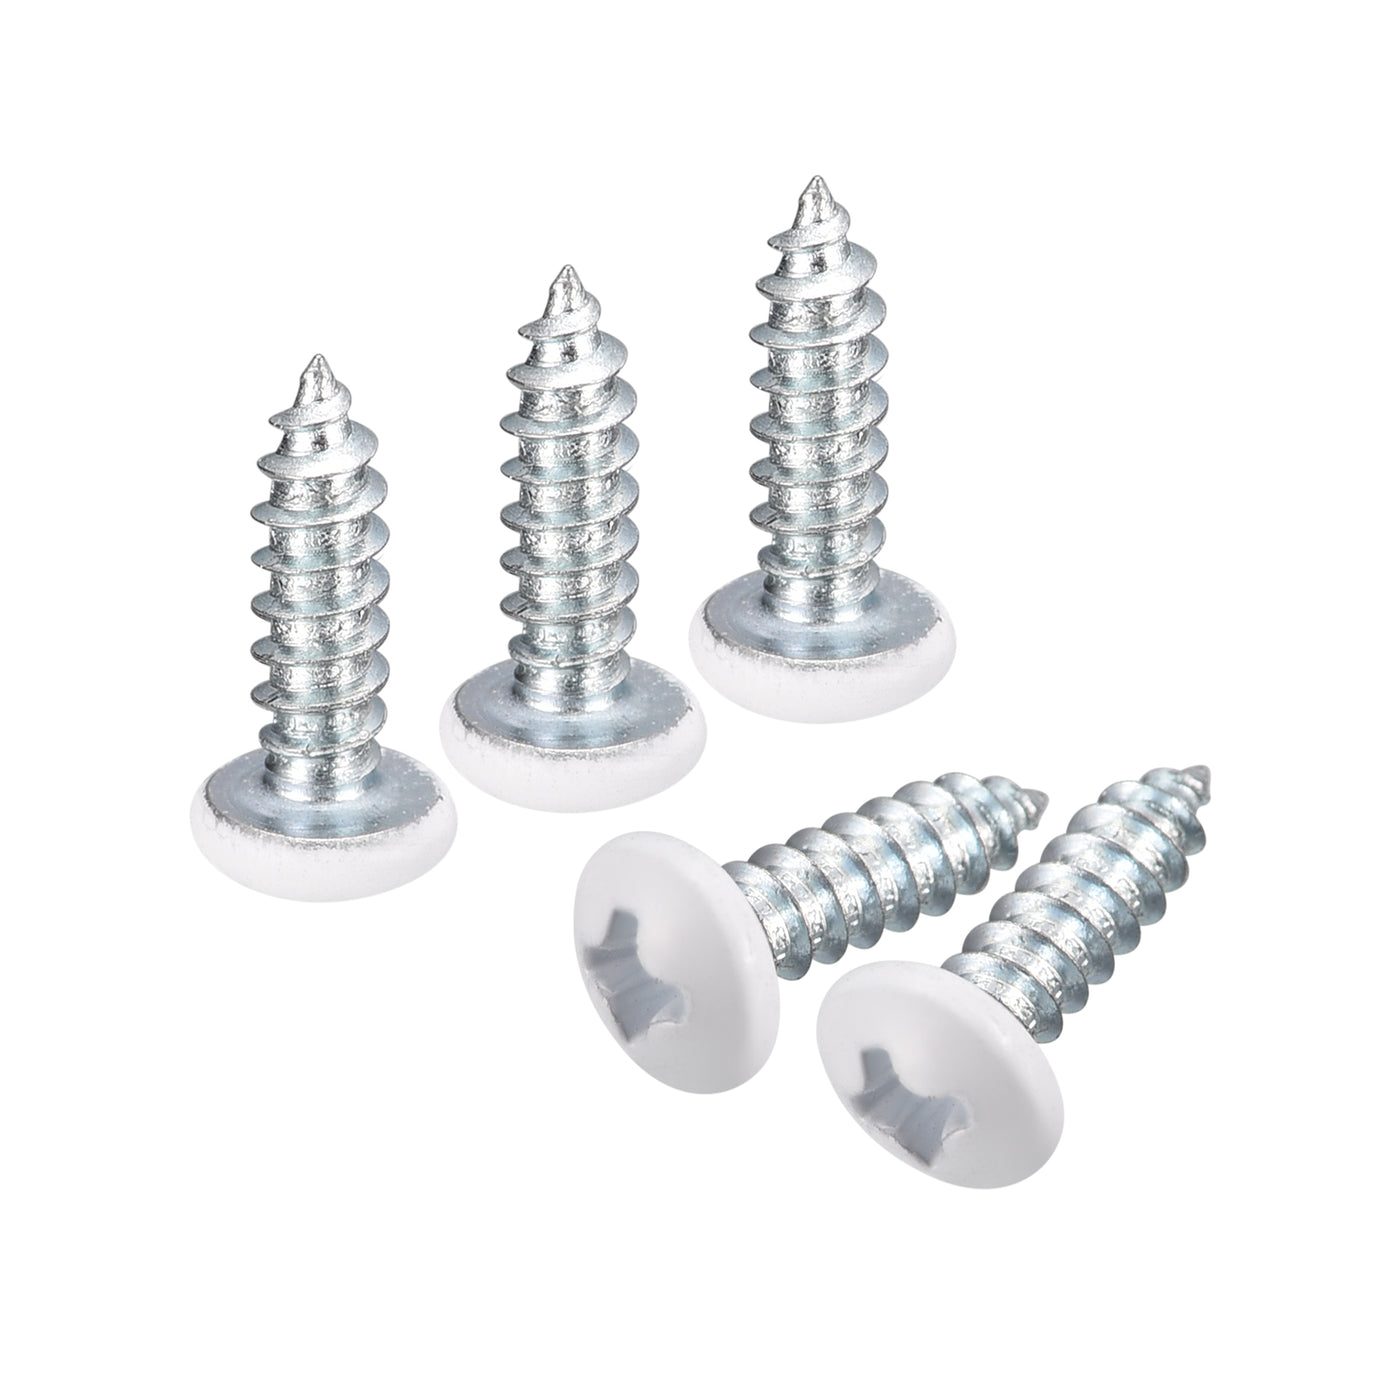 uxcell Uxcell ST4x14mm White Screws Self Tapping Screws, 100pcs Pan Head Phillips Screws